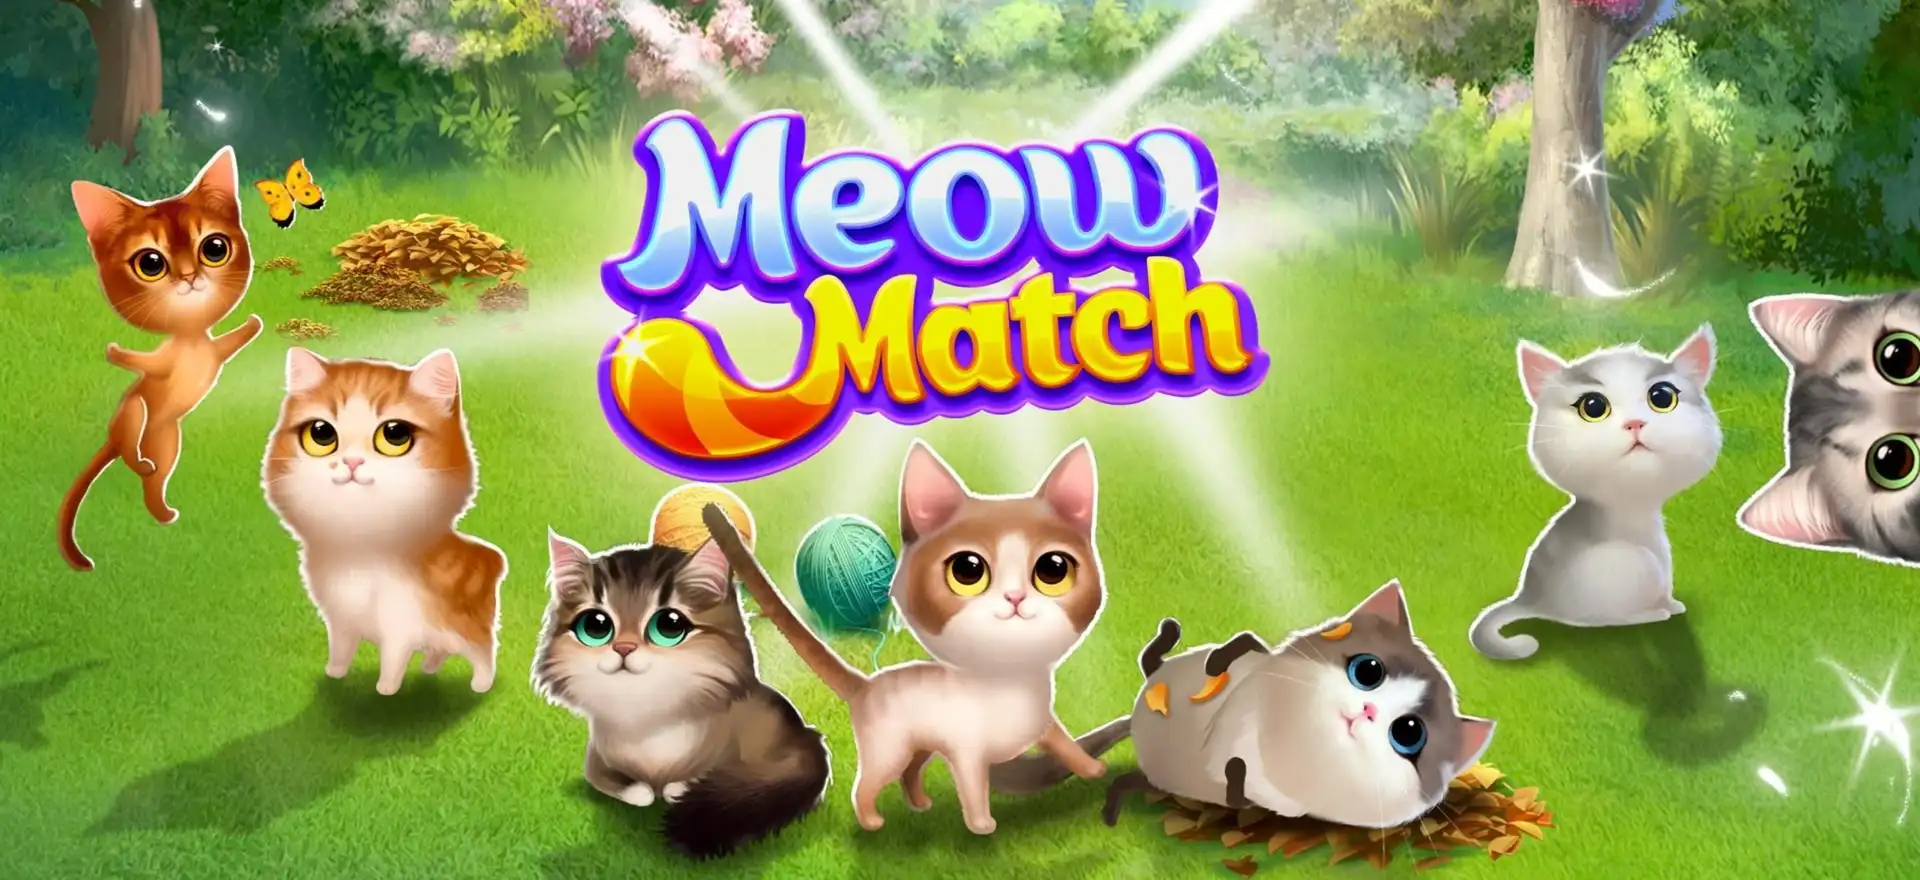 Meow Match Review